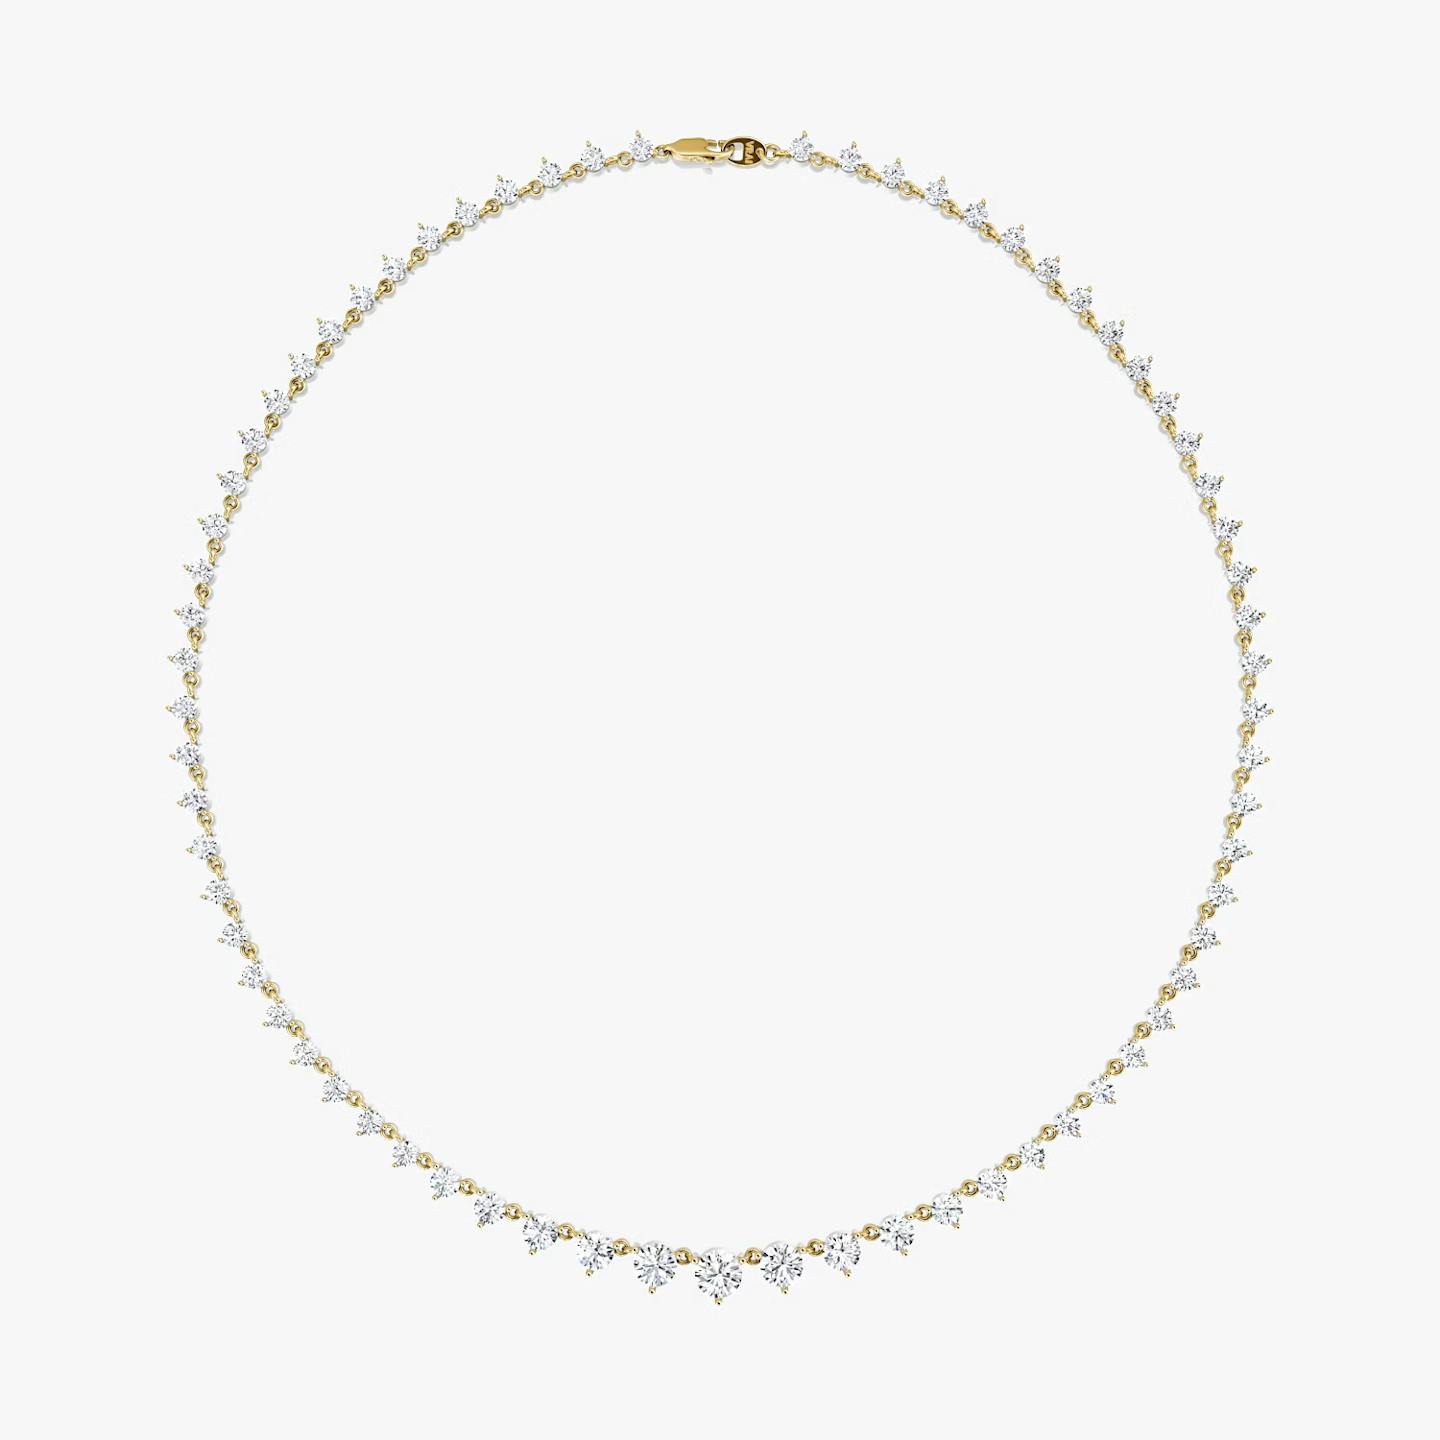 Infinity Linked Tennis Necklace | Round Brilliant | 14k | 18k Yellow Gold | Carat weight: 13 | Chain length: 16-18